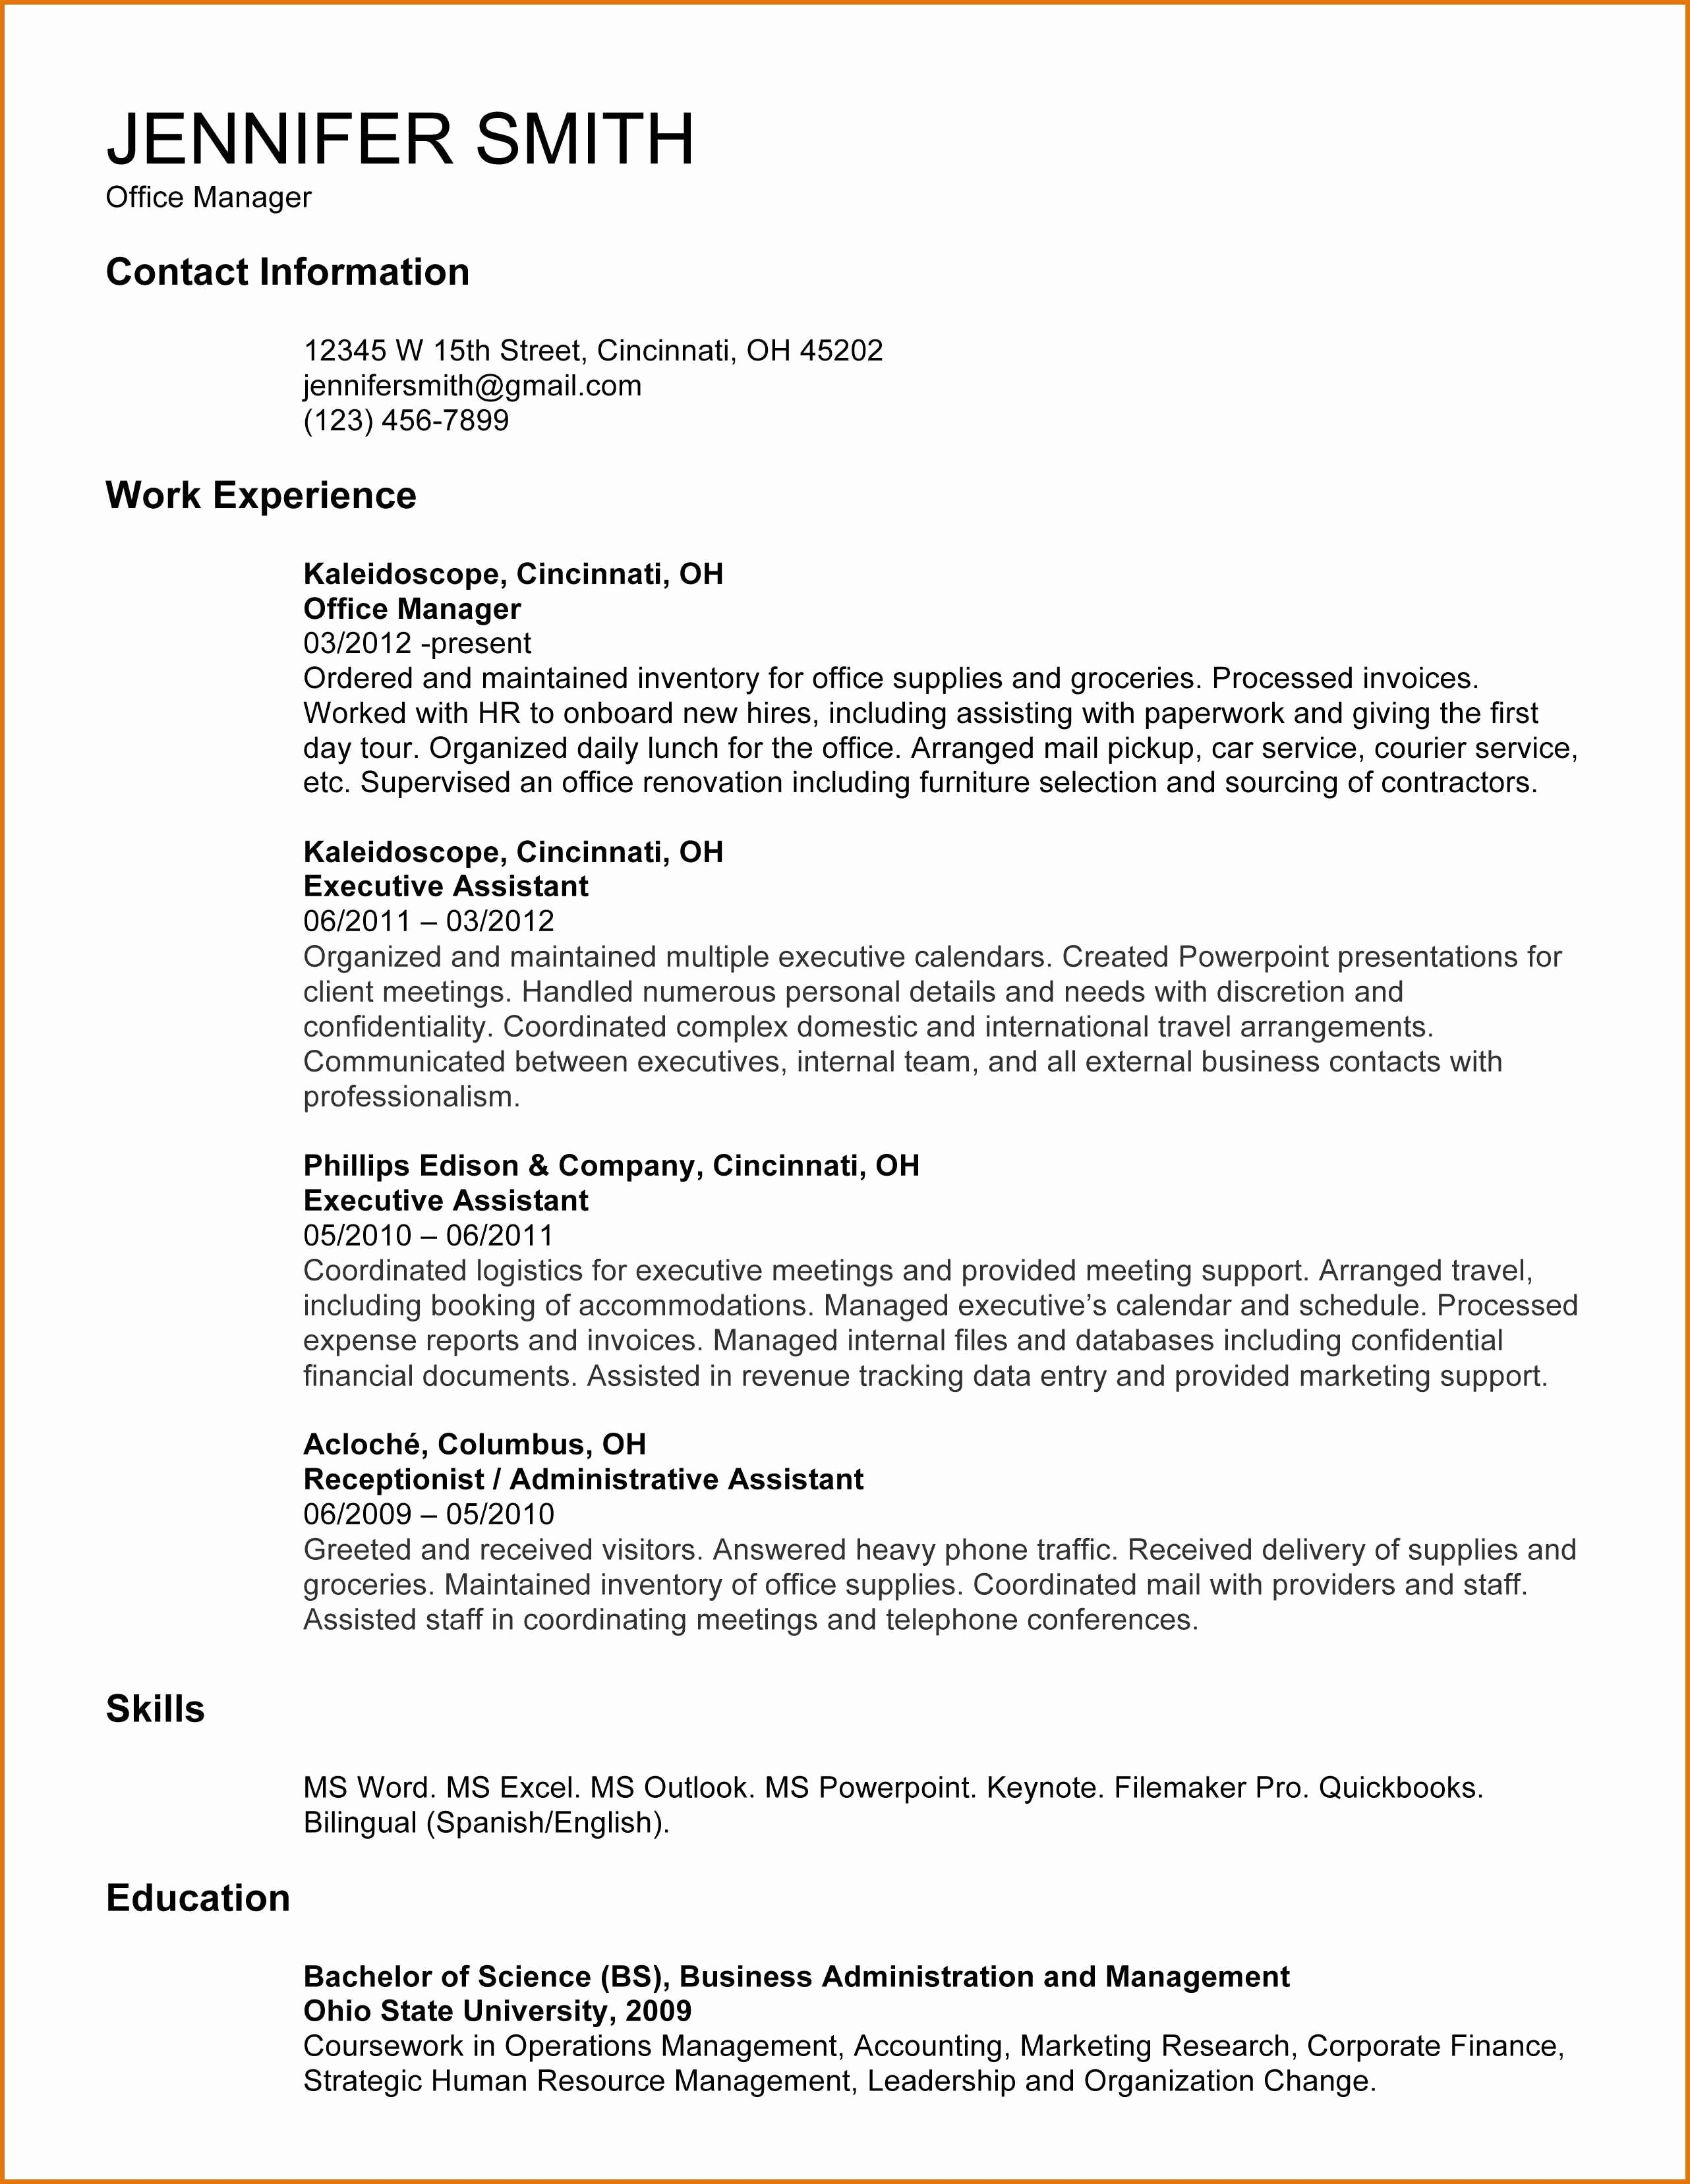 New Hire Letter Template - Cover Letter for Portfolio Ficer Refrence Sponsorship Levels